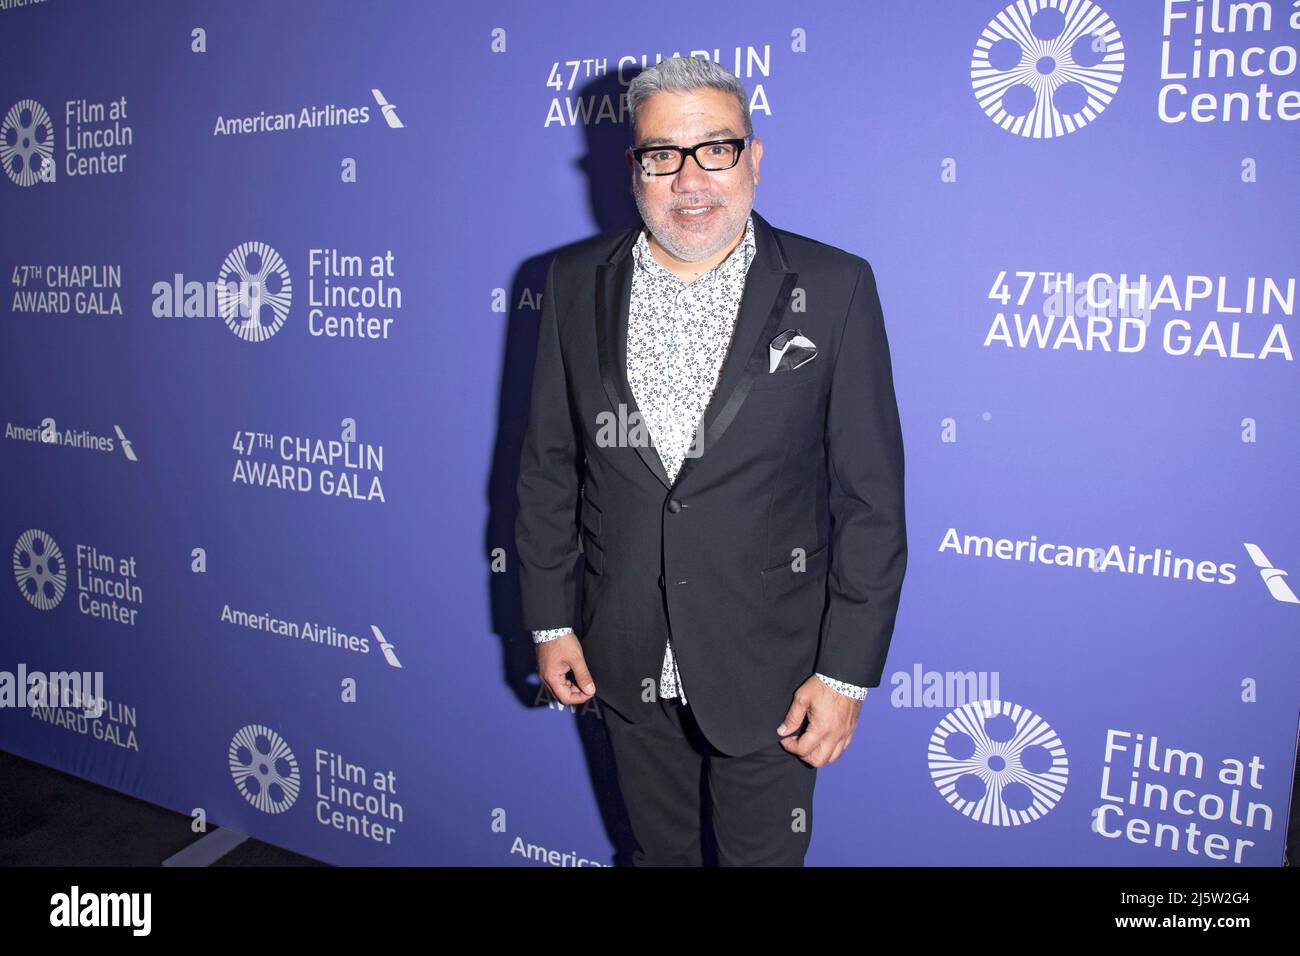 NEW YORK, NEW YORK - APRIL 25: Senior Vice President of FLC and Executive Director of the New York Film Festival Eugene Hernandez attends the 47th Chaplin Award Gala honoring Cate Blanchett at Alice Tully Hall, Lincoln Center on April 25, 2022 in New York City. Stock Photo